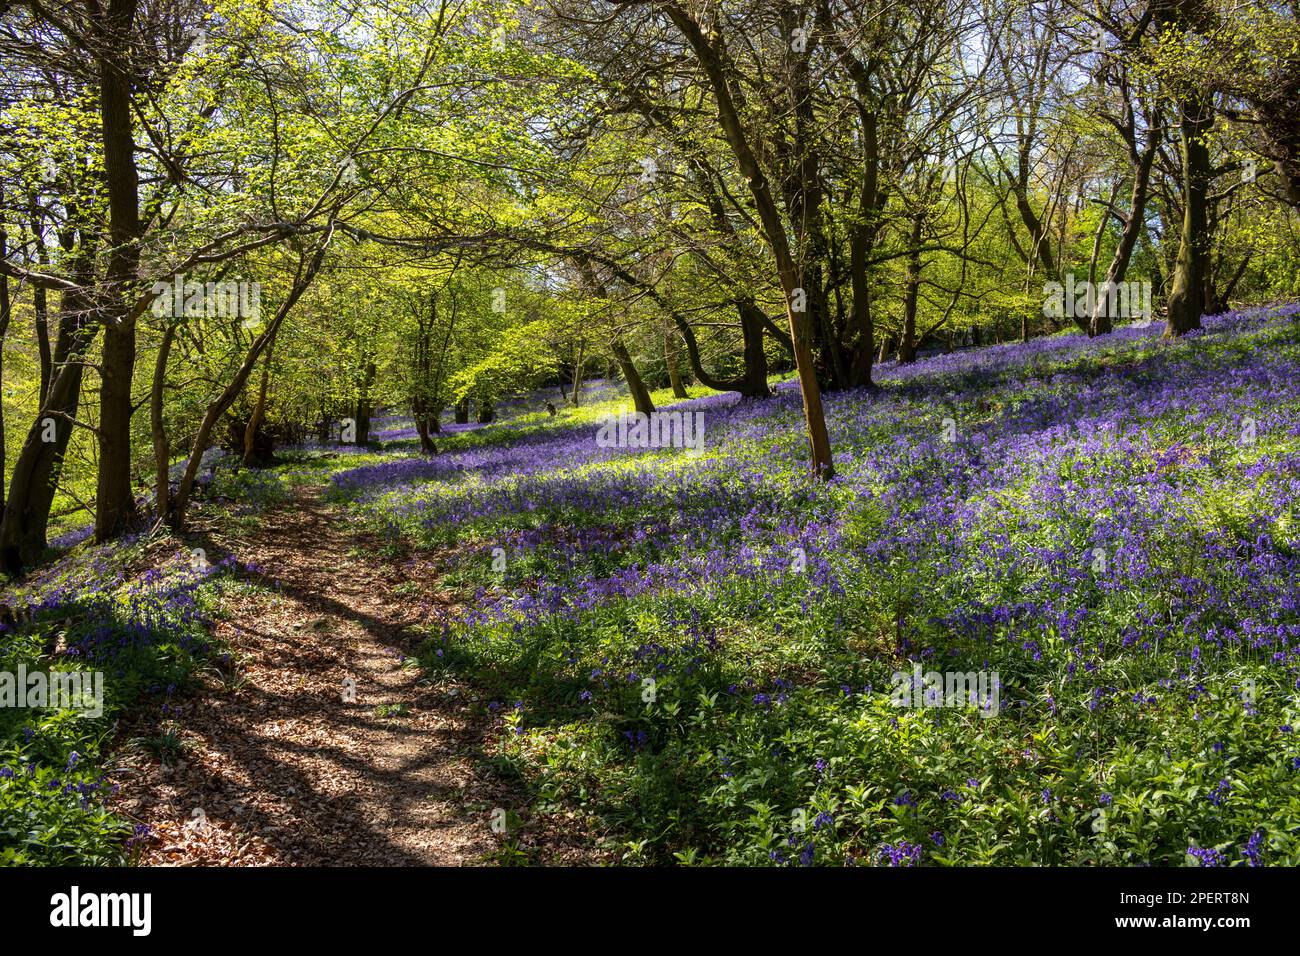 Bluebells in an English woodland Stock Photo